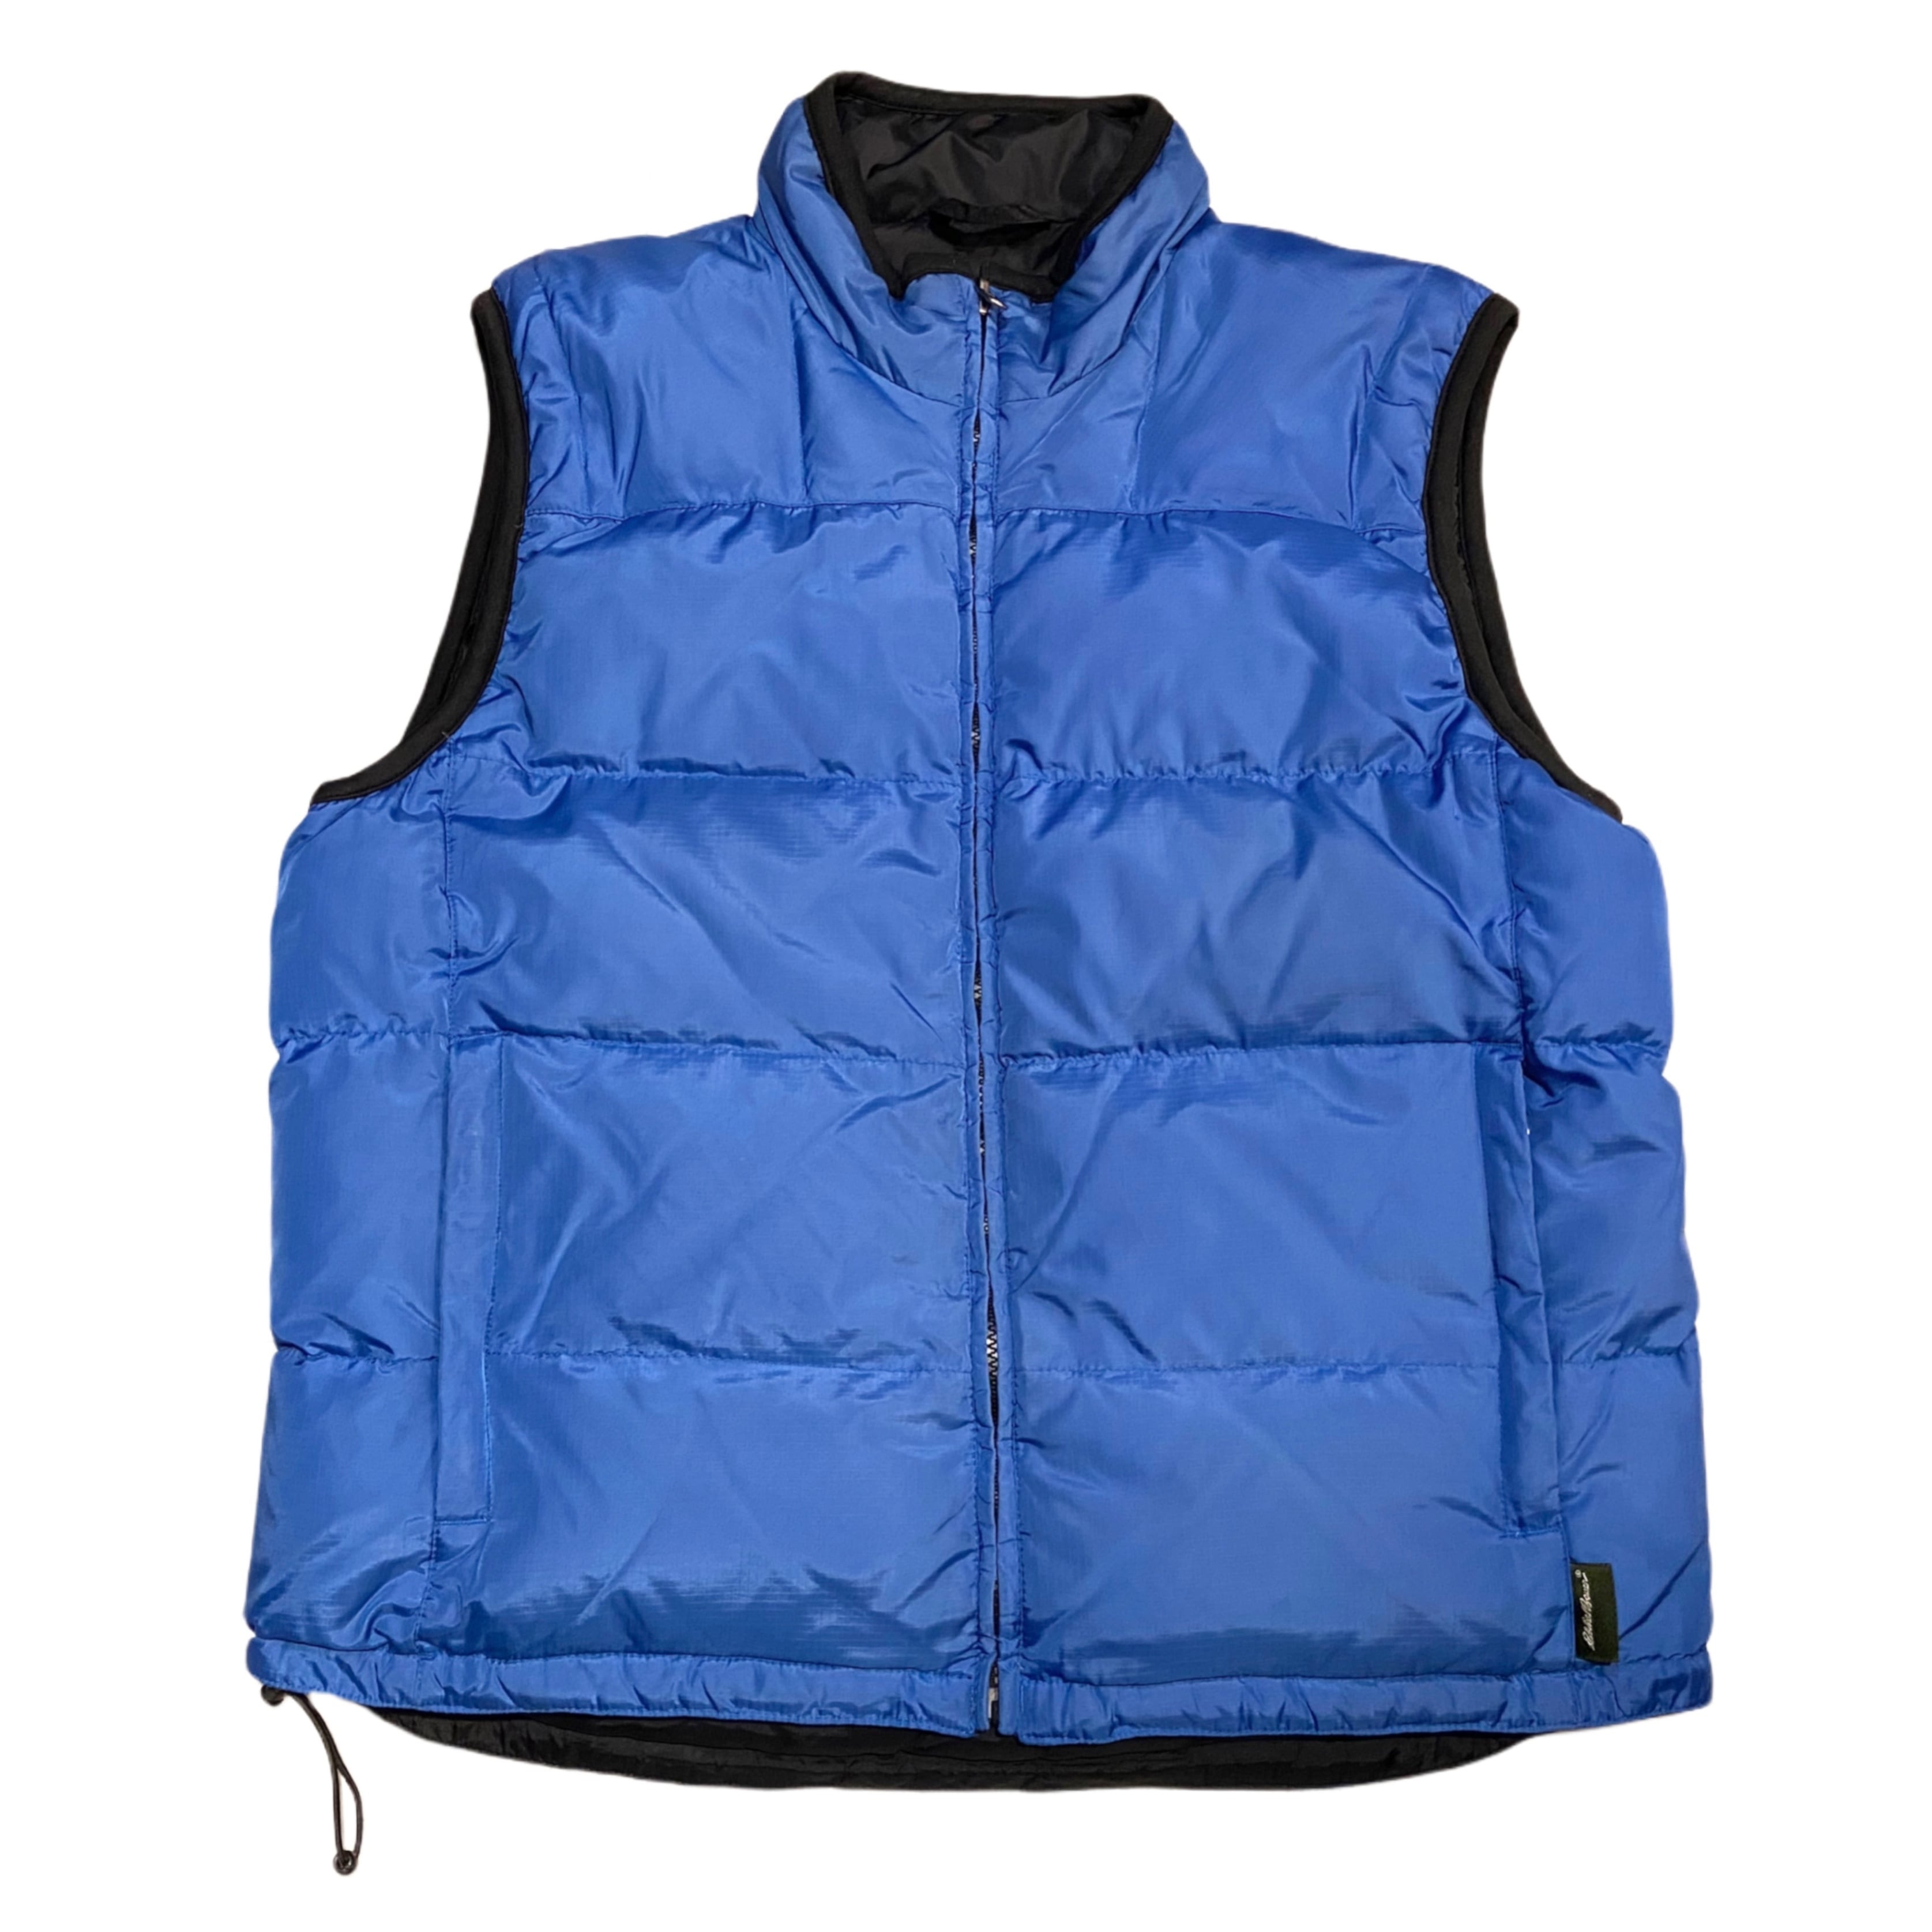 VEST | BACK IN THE DAYZ.